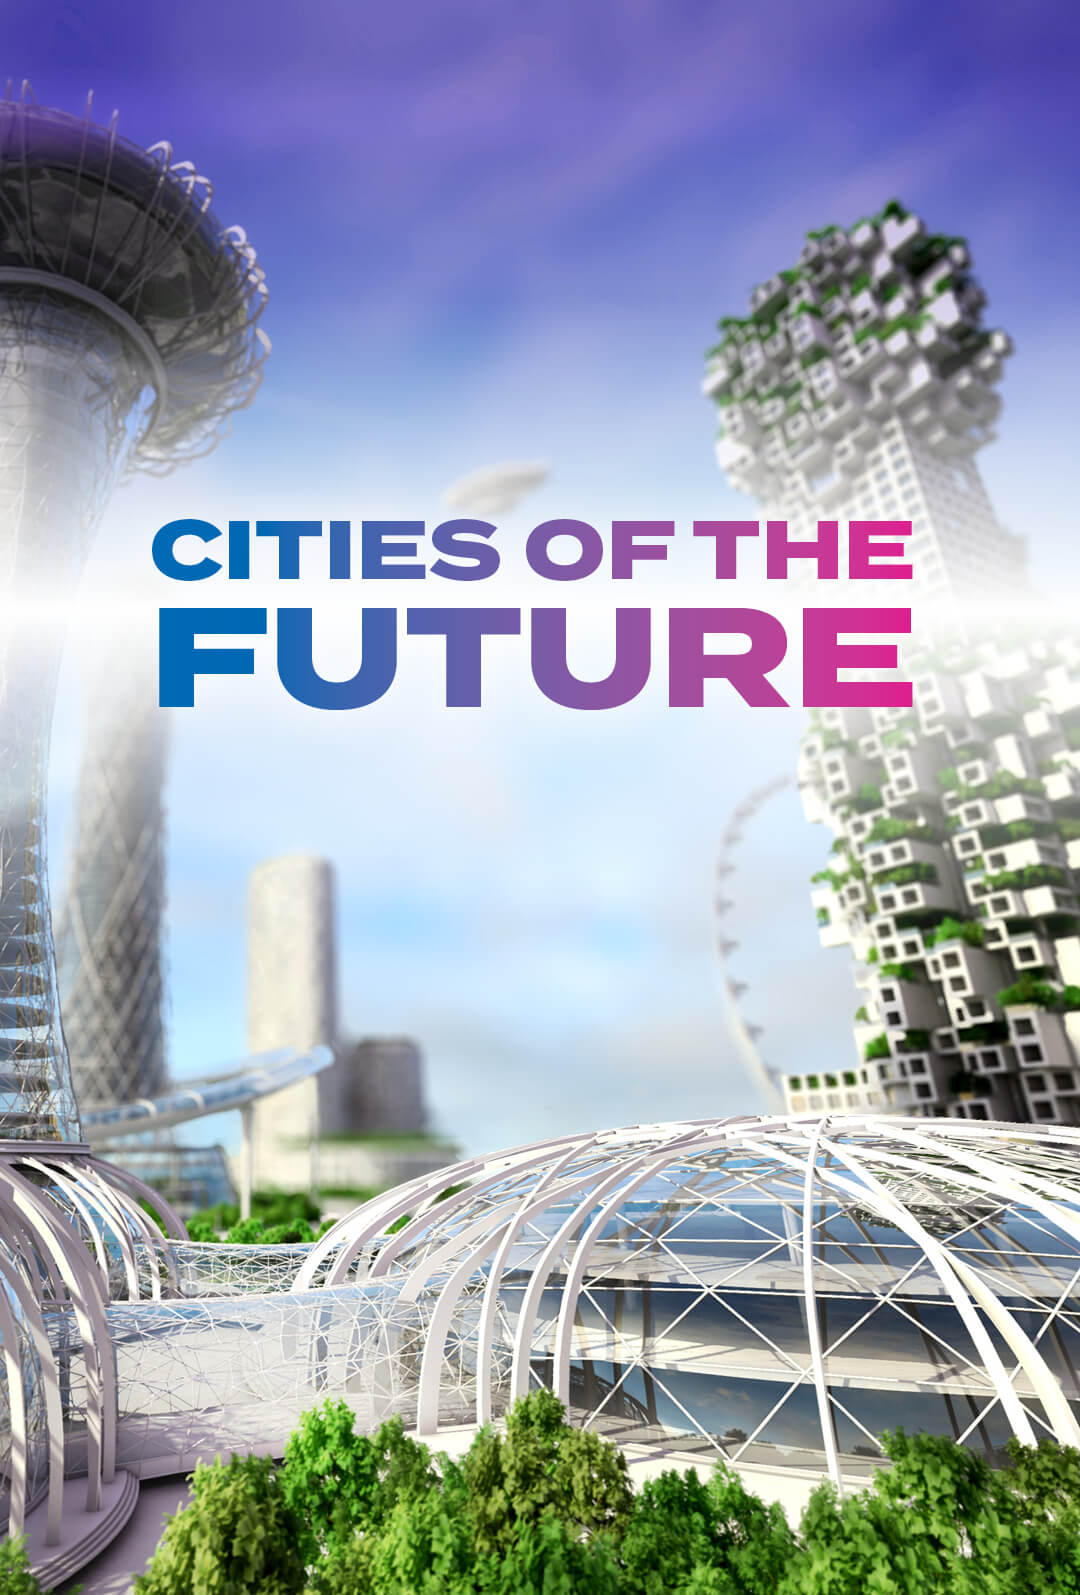 Cities of the Future